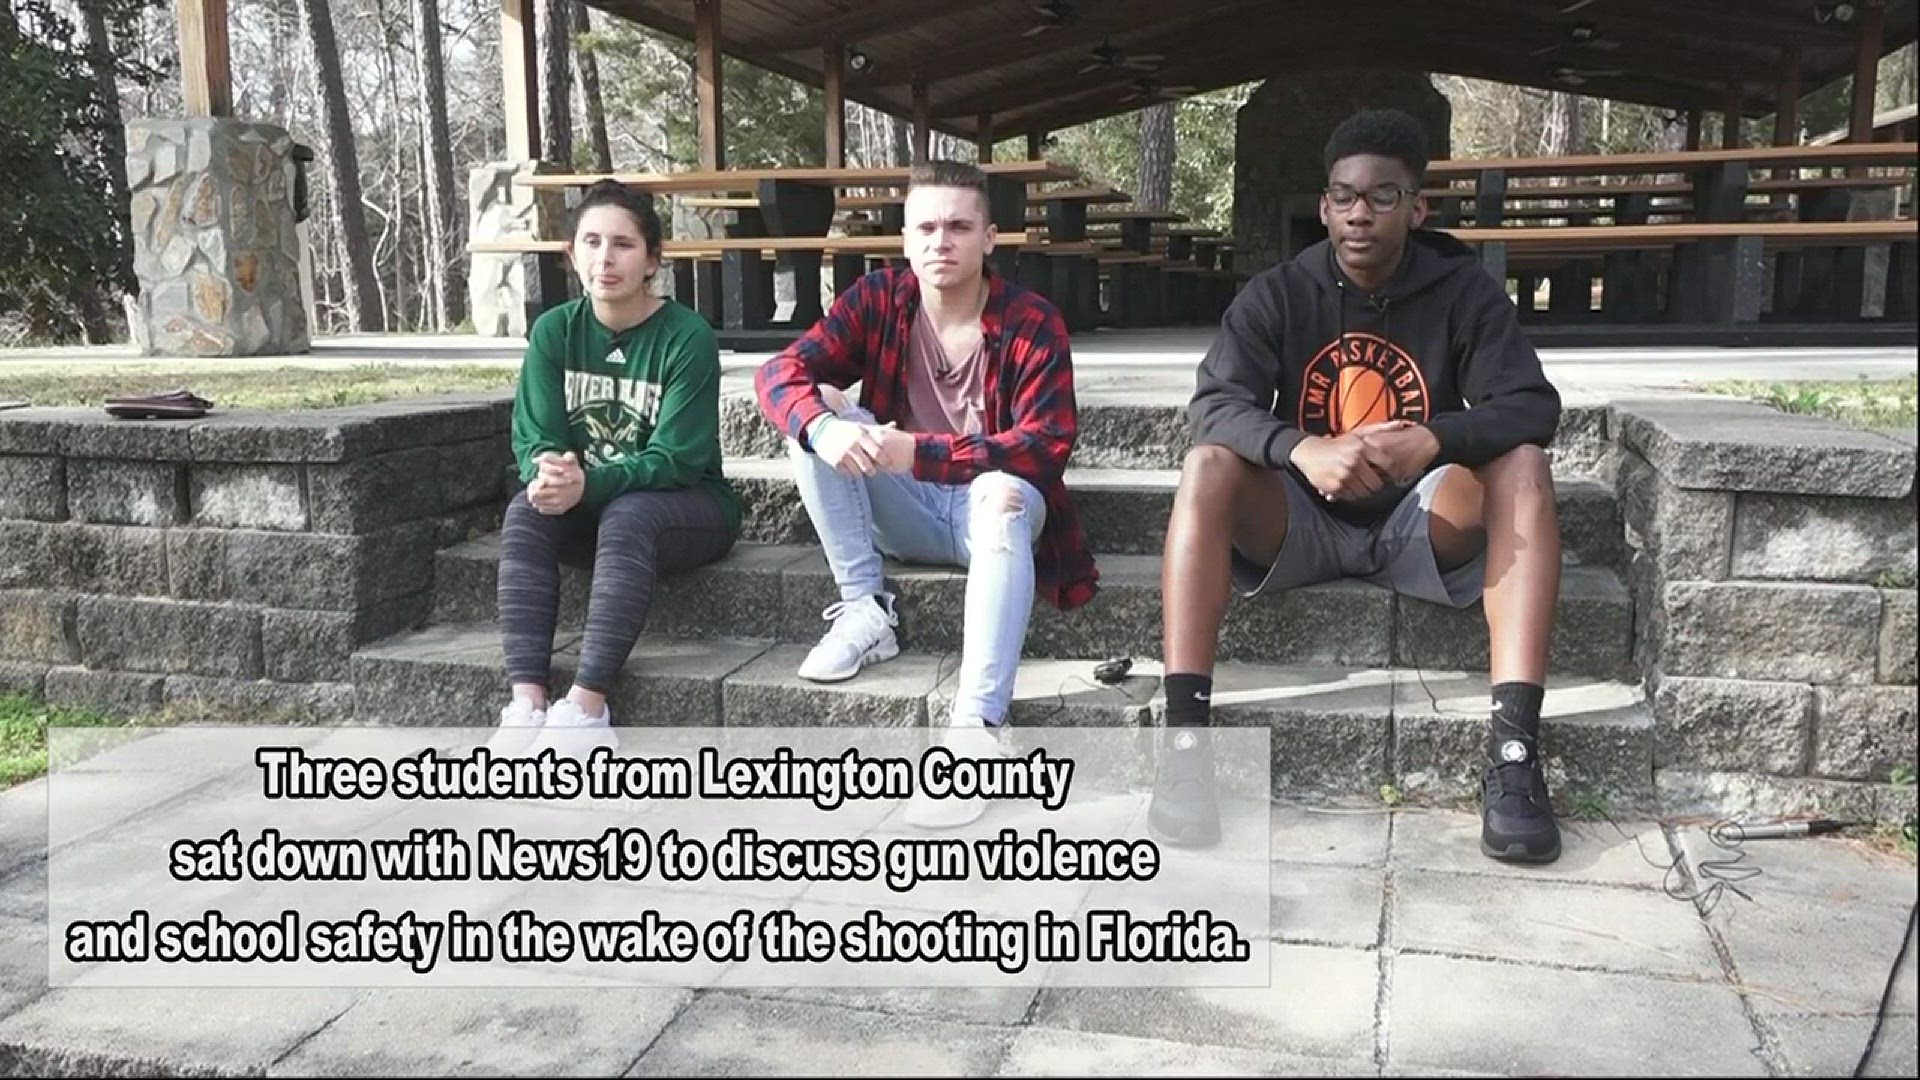 Three high school students from Lexington County, SC discuss gun violence and school safety in the wake of the mass shooting in Parkland, Florida.